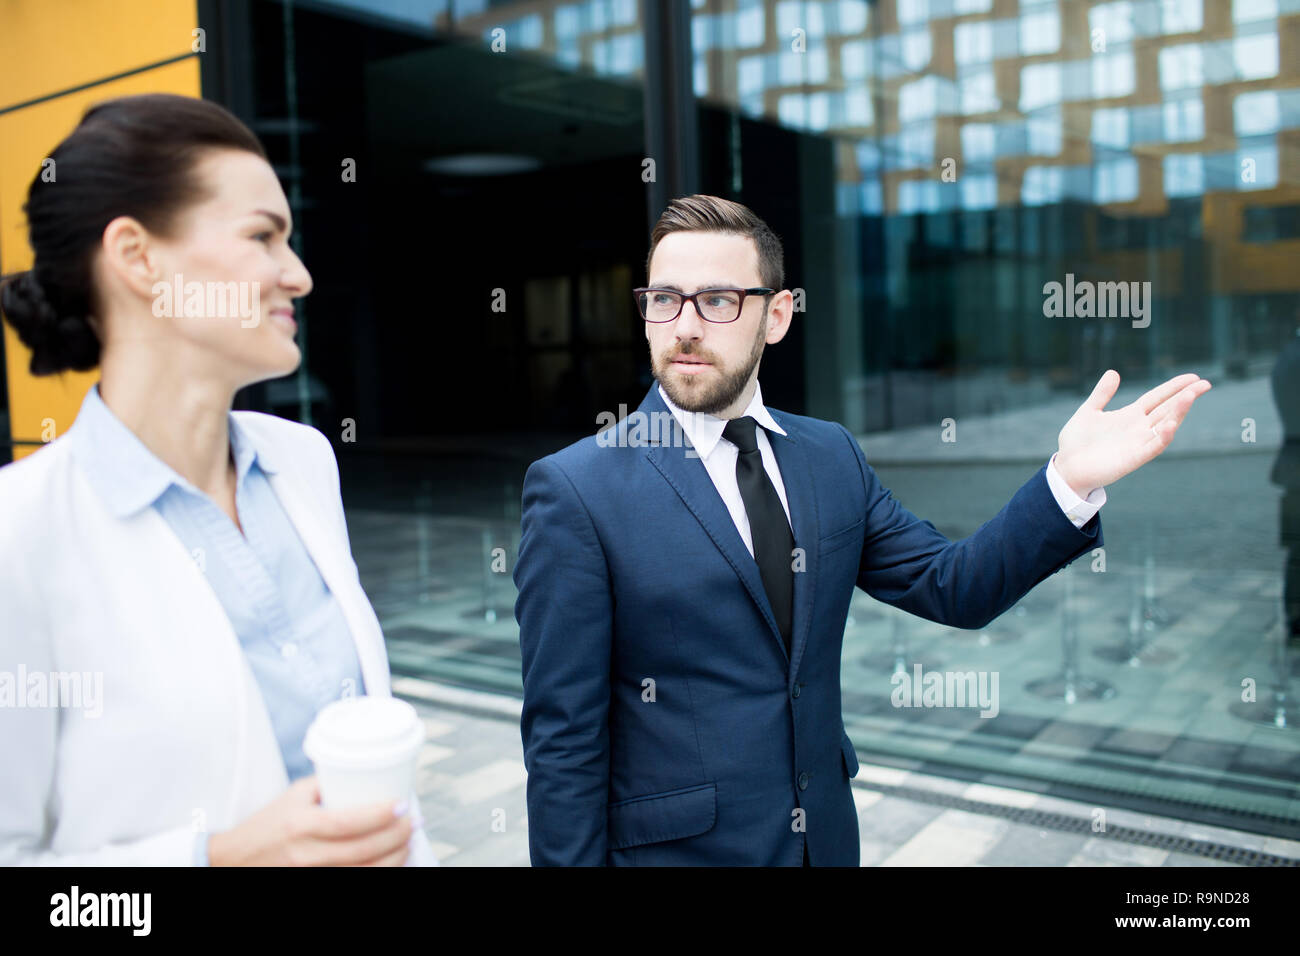 Man in formal suit walking with woman and talking Stock Photo